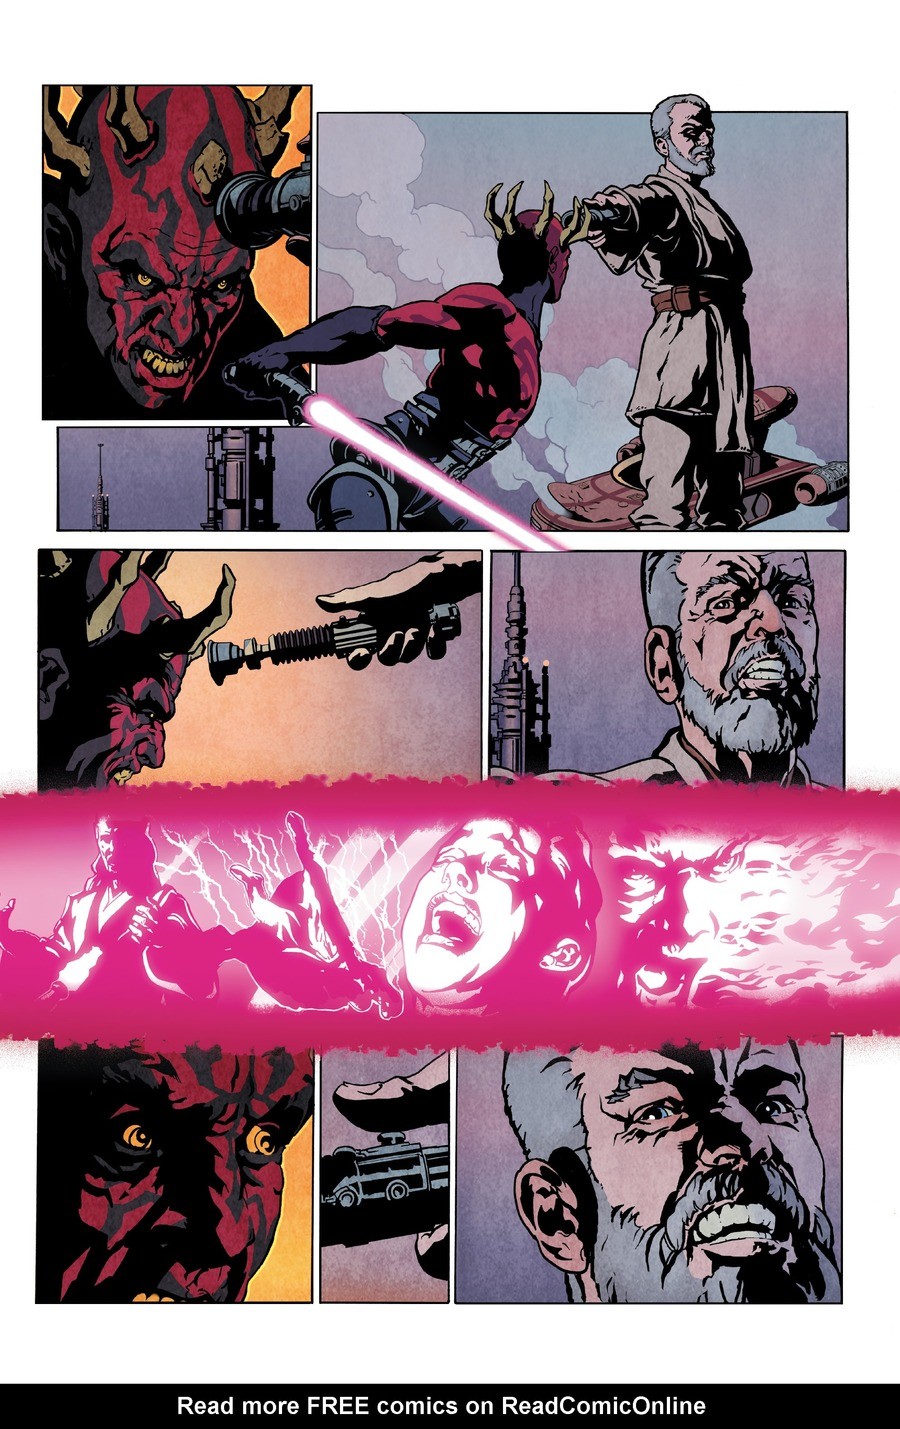 Old Wounds. Source is Star Wars Visionaries. join list: StarWars (4 subs)Mention History .. Is this cannon? If so, it would be pretty anti-climatic for someone like maul to just die after like 5 pages of a comic. Pretty sure this comic was made specifi